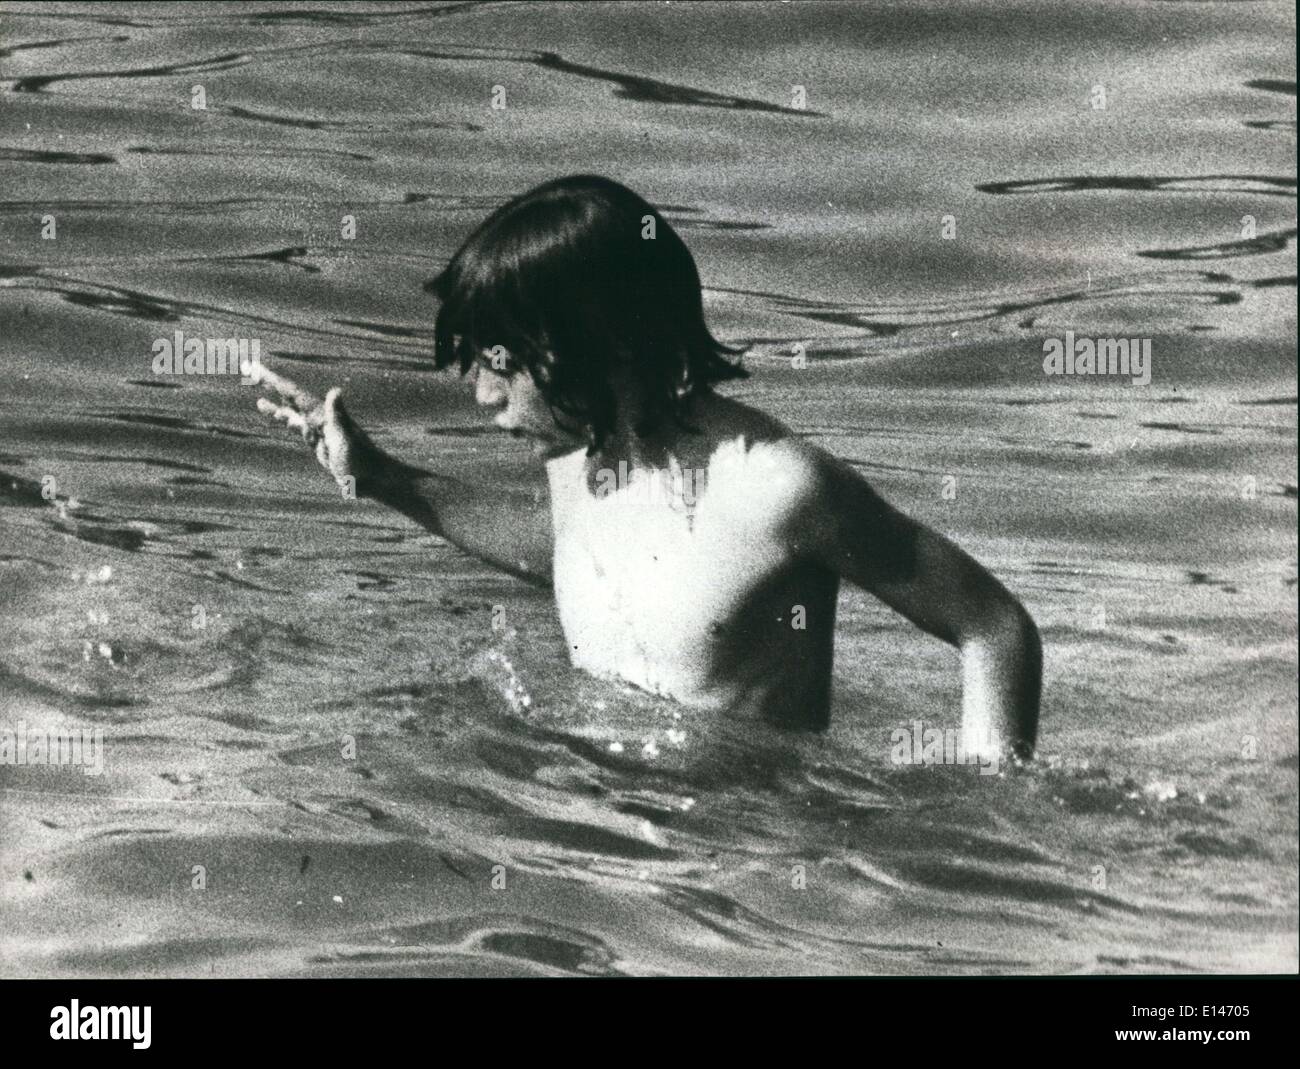 Apr. 16, 2012 - John- John Kennedy, the son of the late President emerges from the water during a swim off the Greek coast. Stock Photo